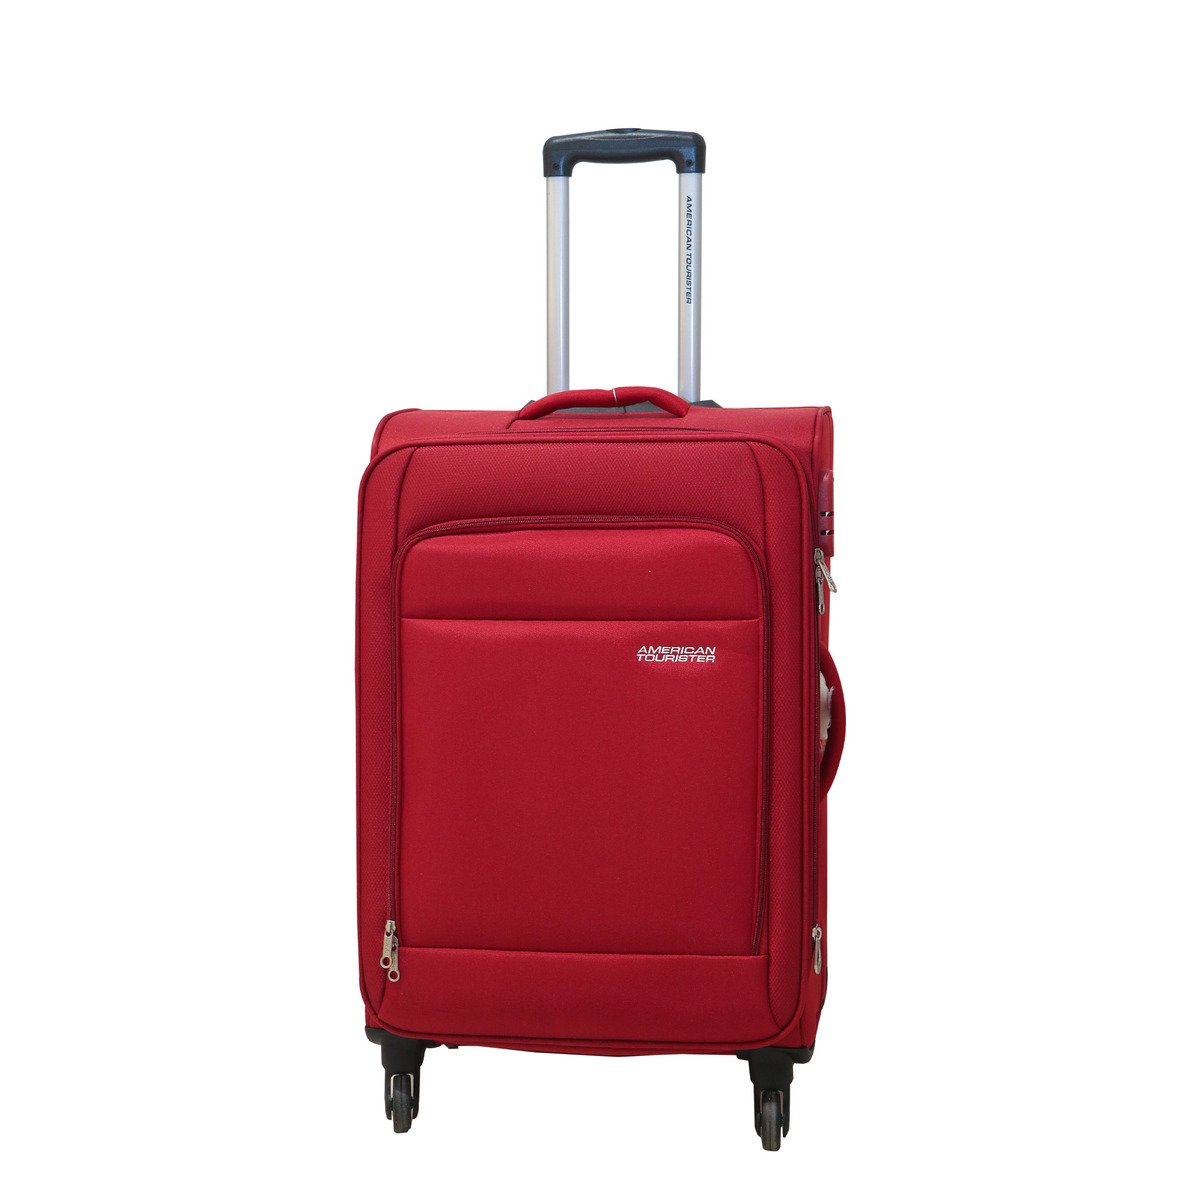 American Tourister Oakland 4 Wheel Soft Trolley, 78 cm, Red